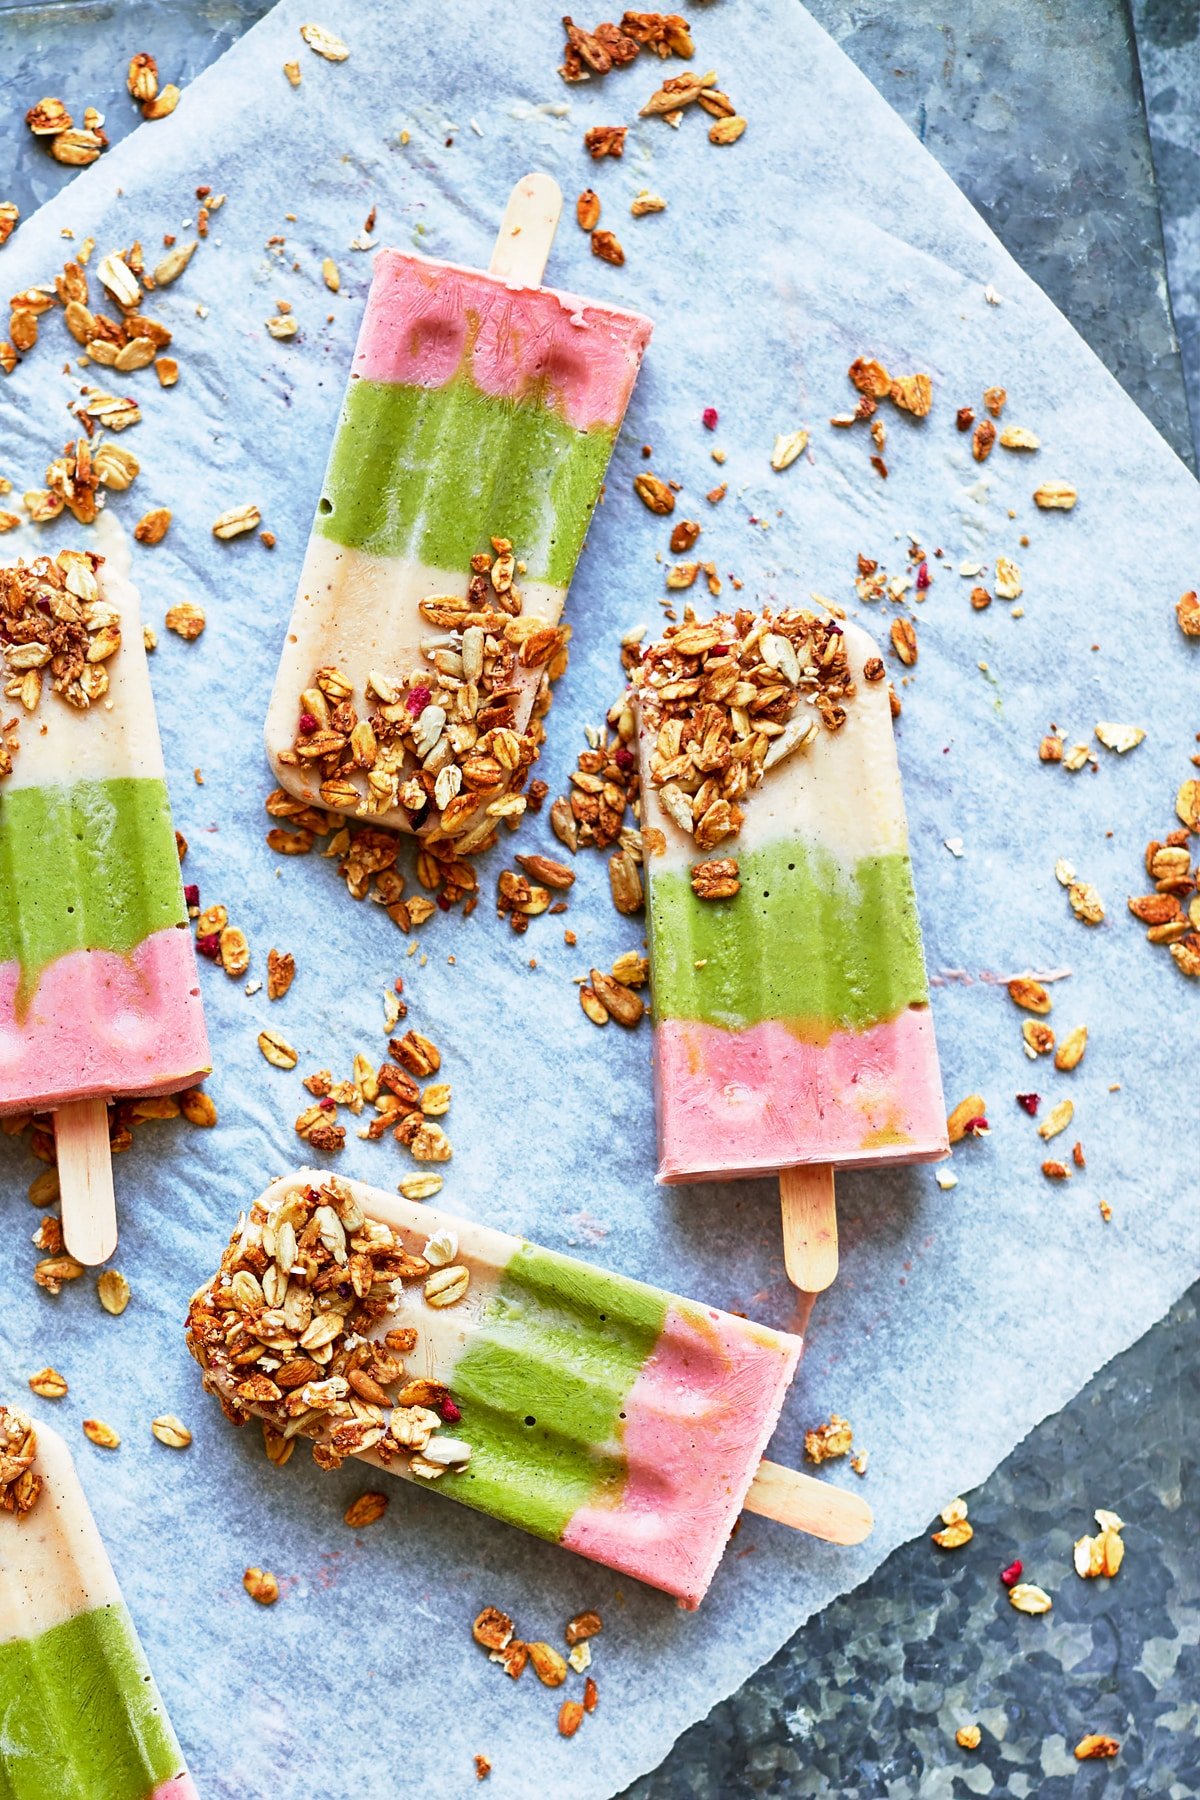 Fruit and veg lollies arranged on a granite board. The lollies have been dipped in granola.